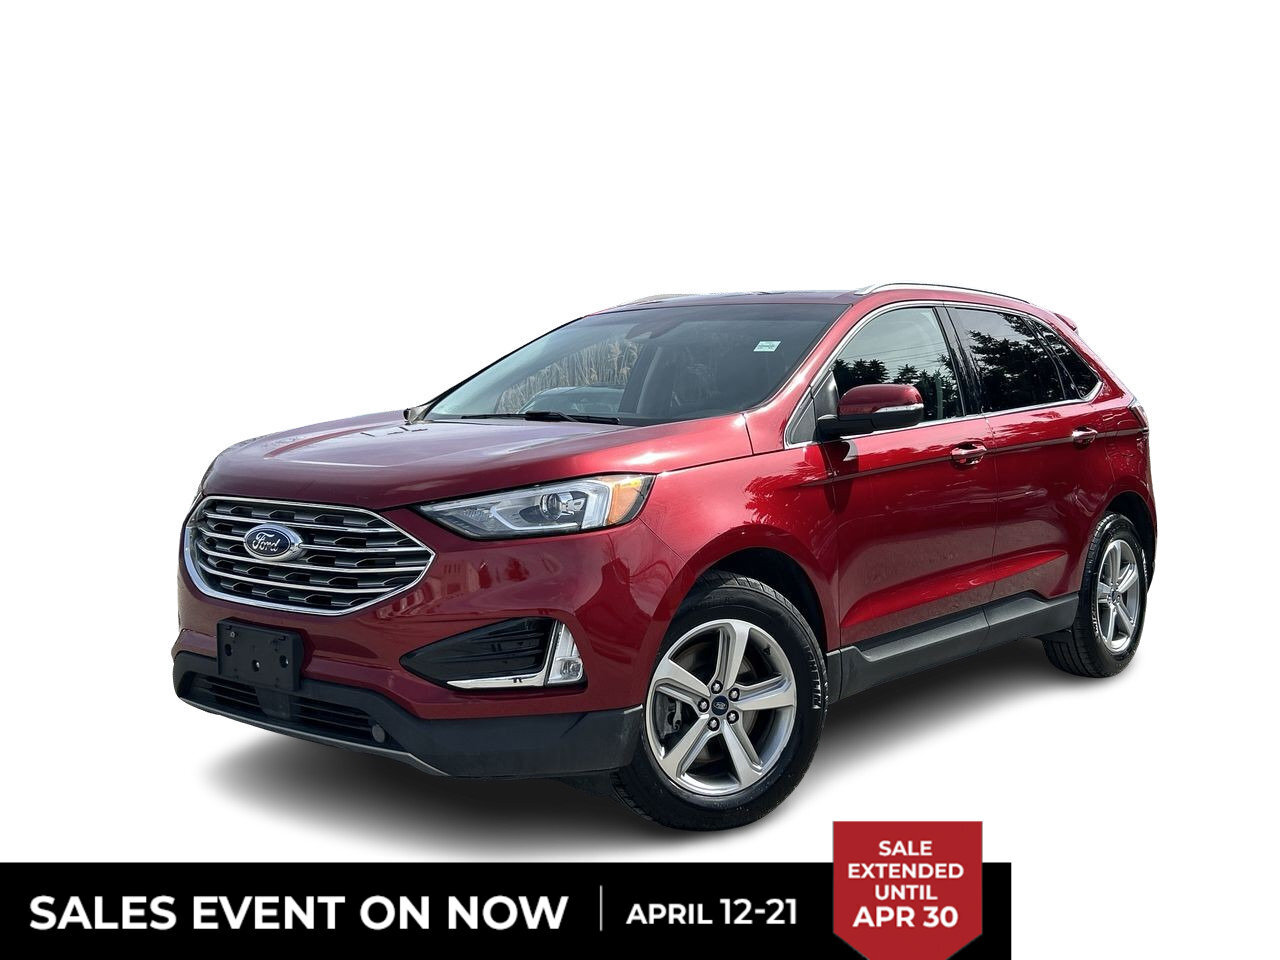 2019 Ford Edge SEL - AWD Accident Free | Co-Pilot 360 | Cold Weat